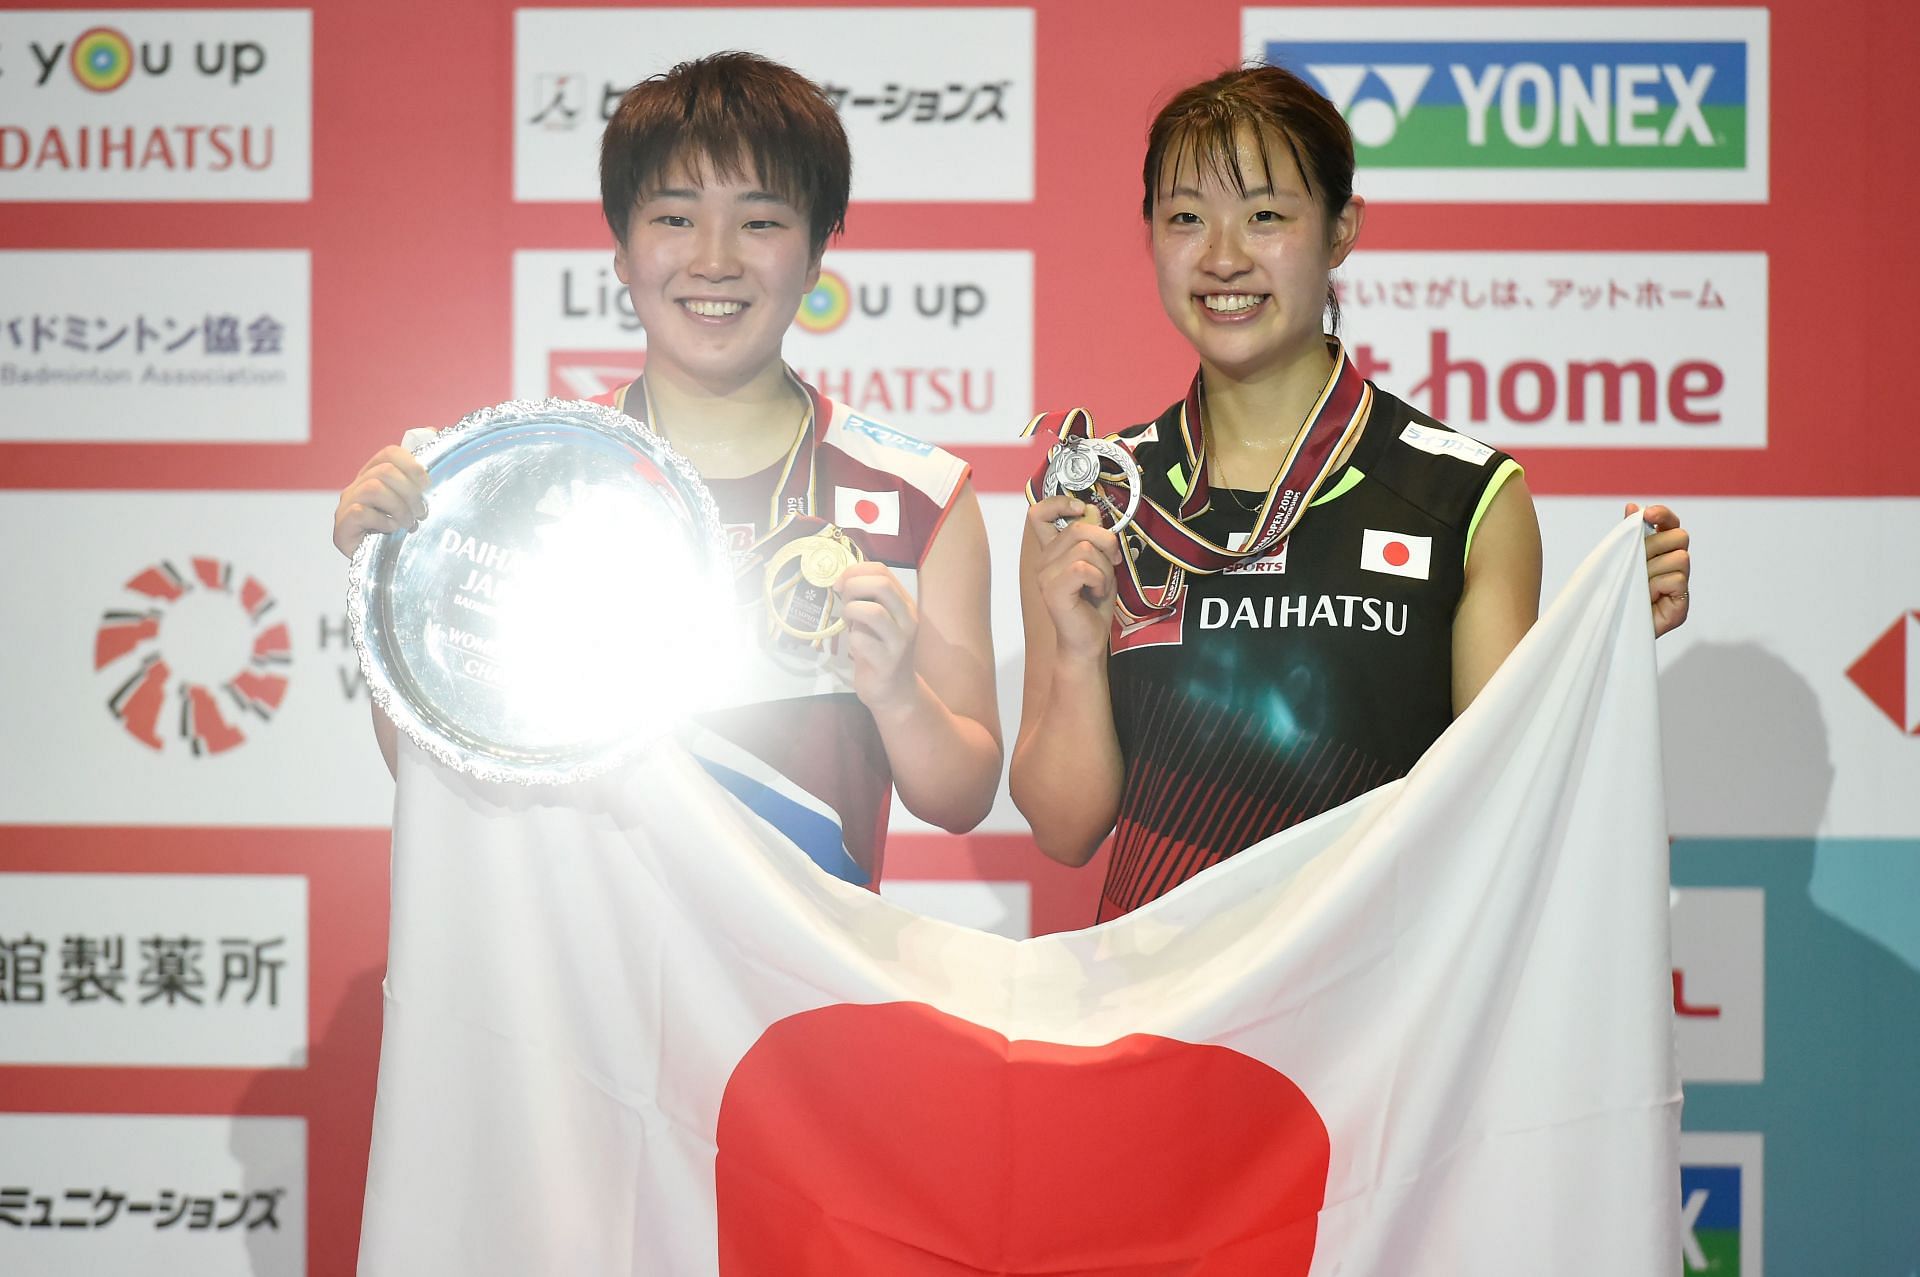 Both Akane Yamaguchi and Nozomi Okuhara are known for their resilience